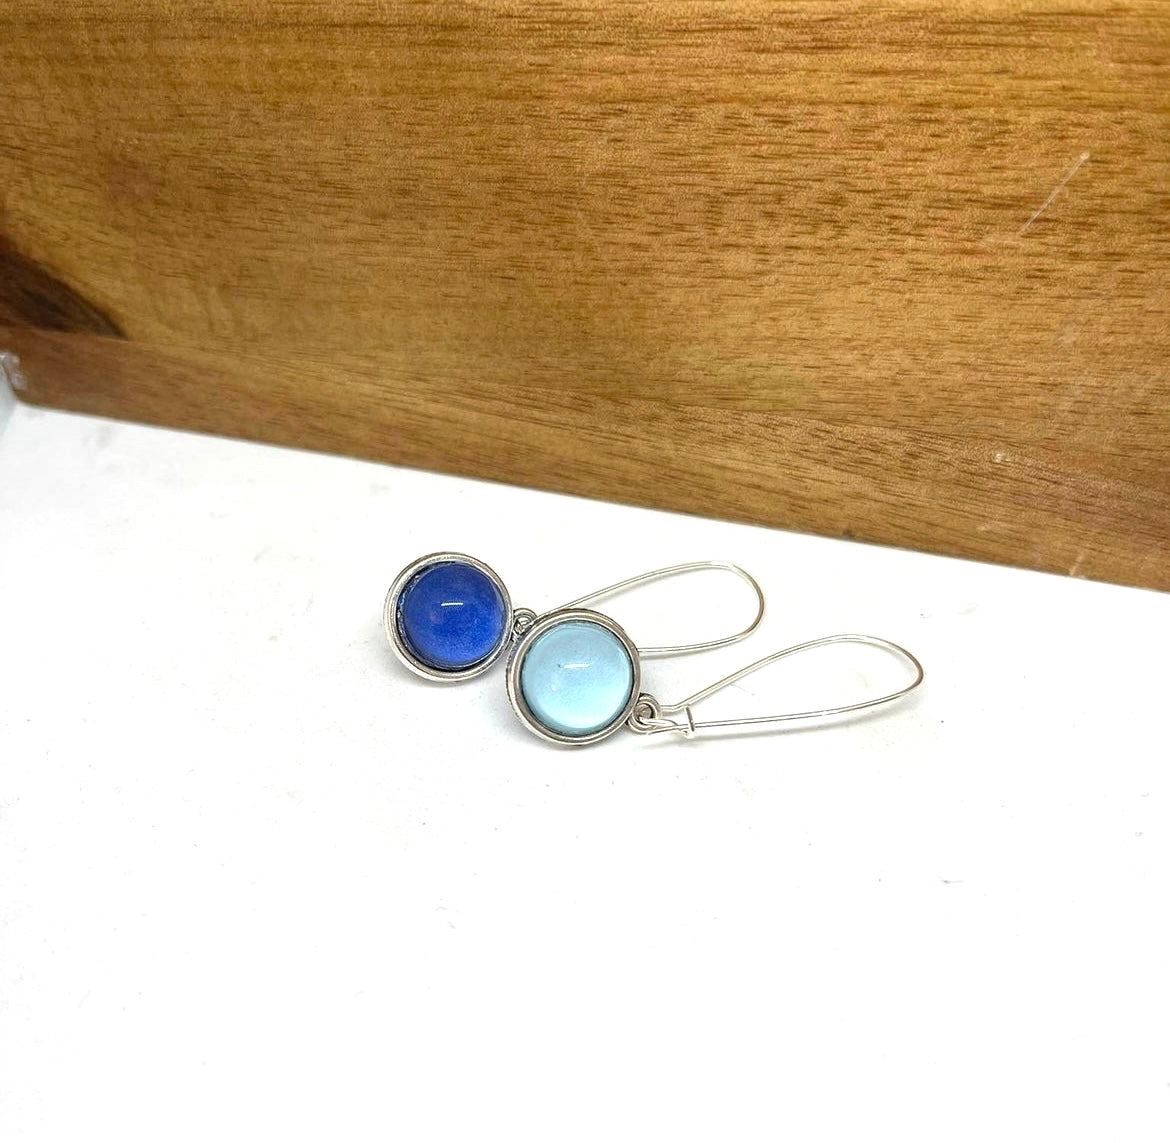 Double sided glass dome earrings with Electric blue on one side and sky blue on the other